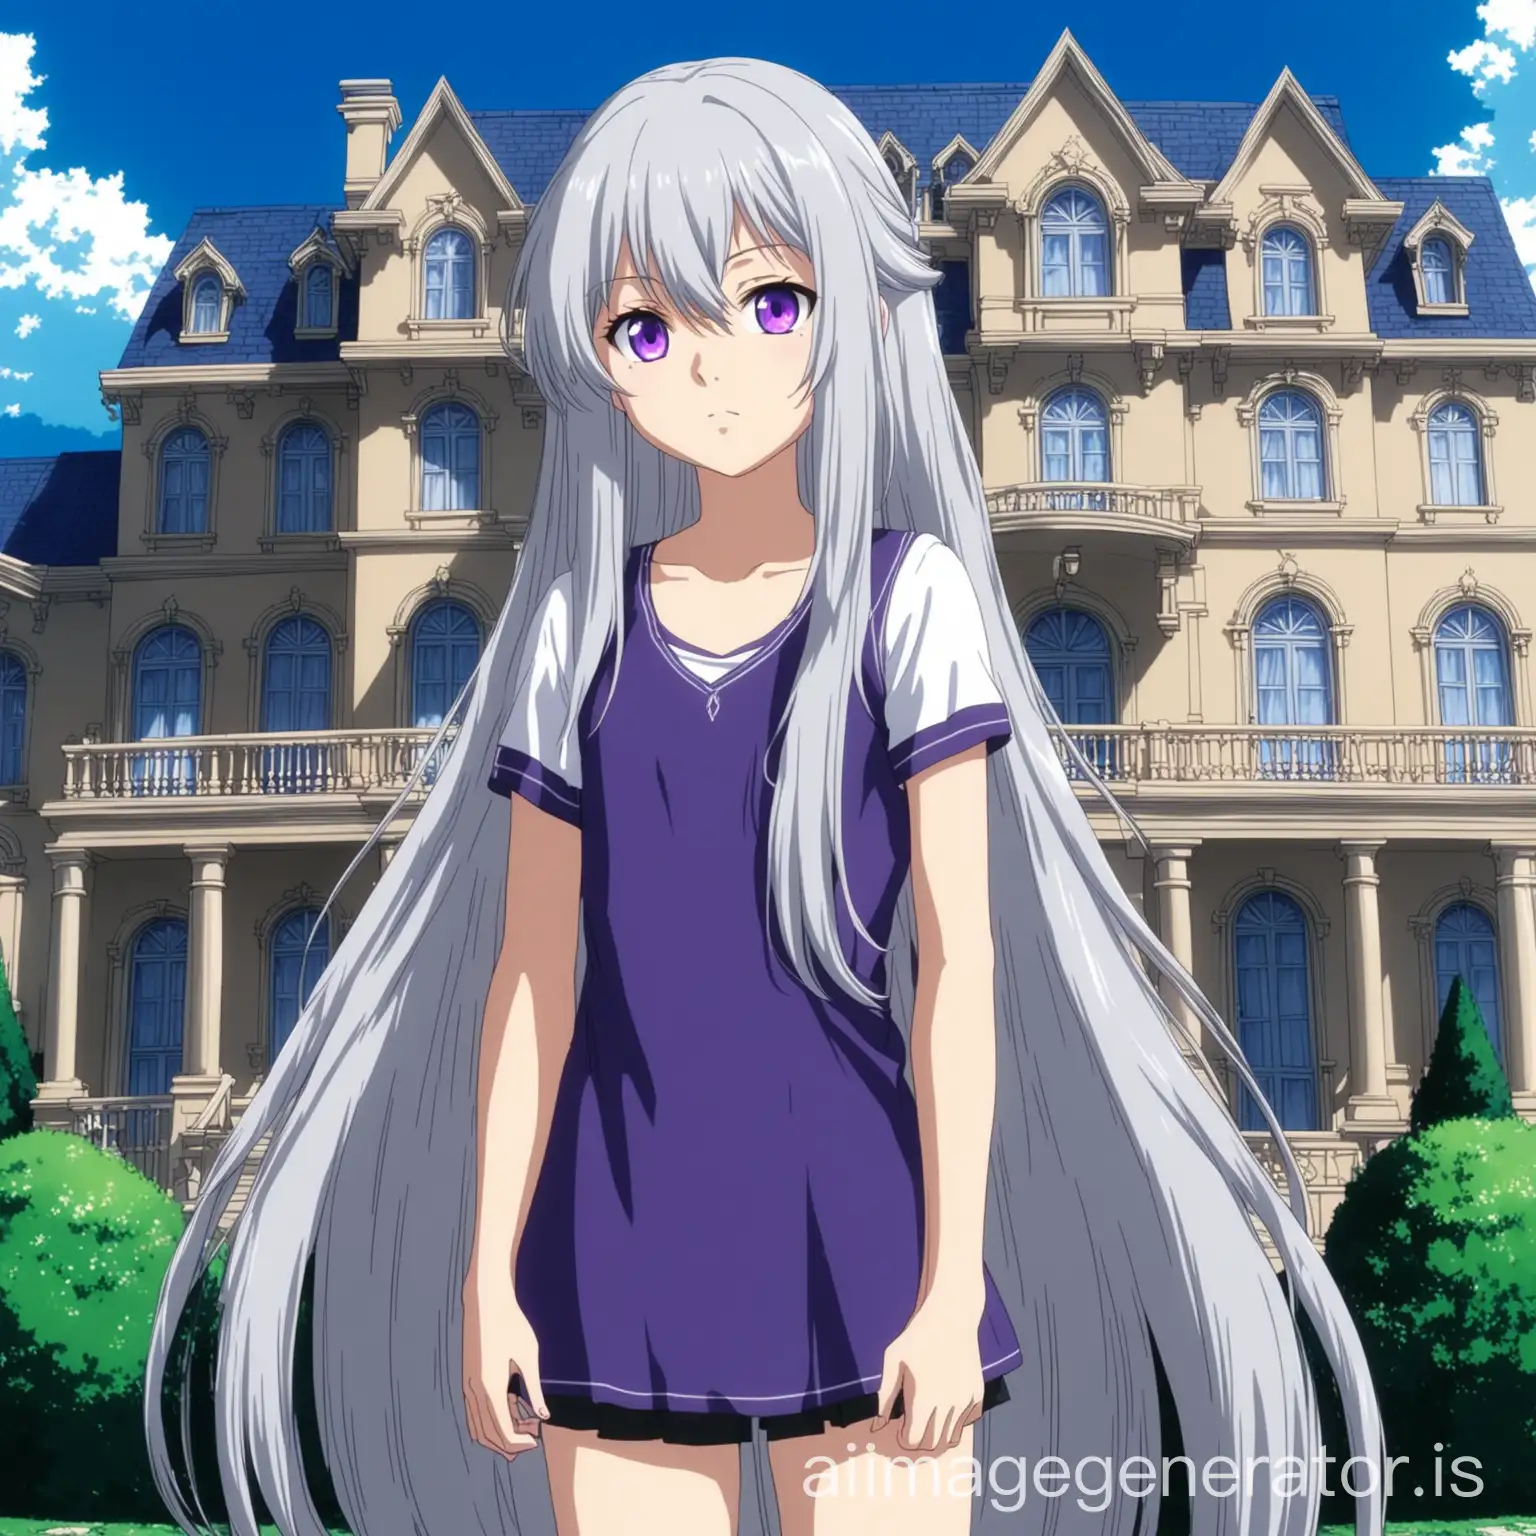 A teenage anime girl with long silver hair and purple eyes. Standing in front of her mansion